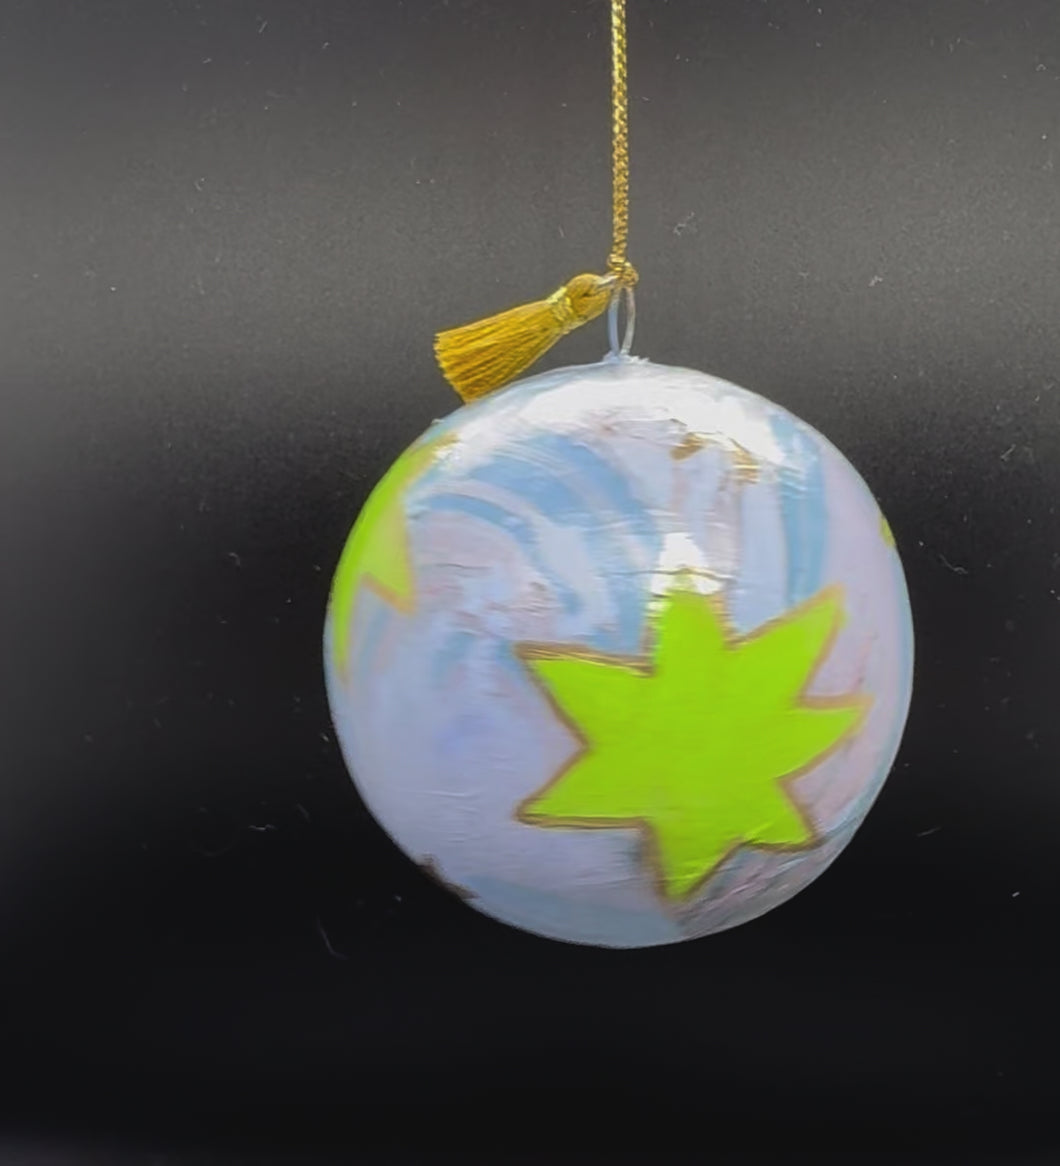 Neon Green on Marbled Blue Ornament